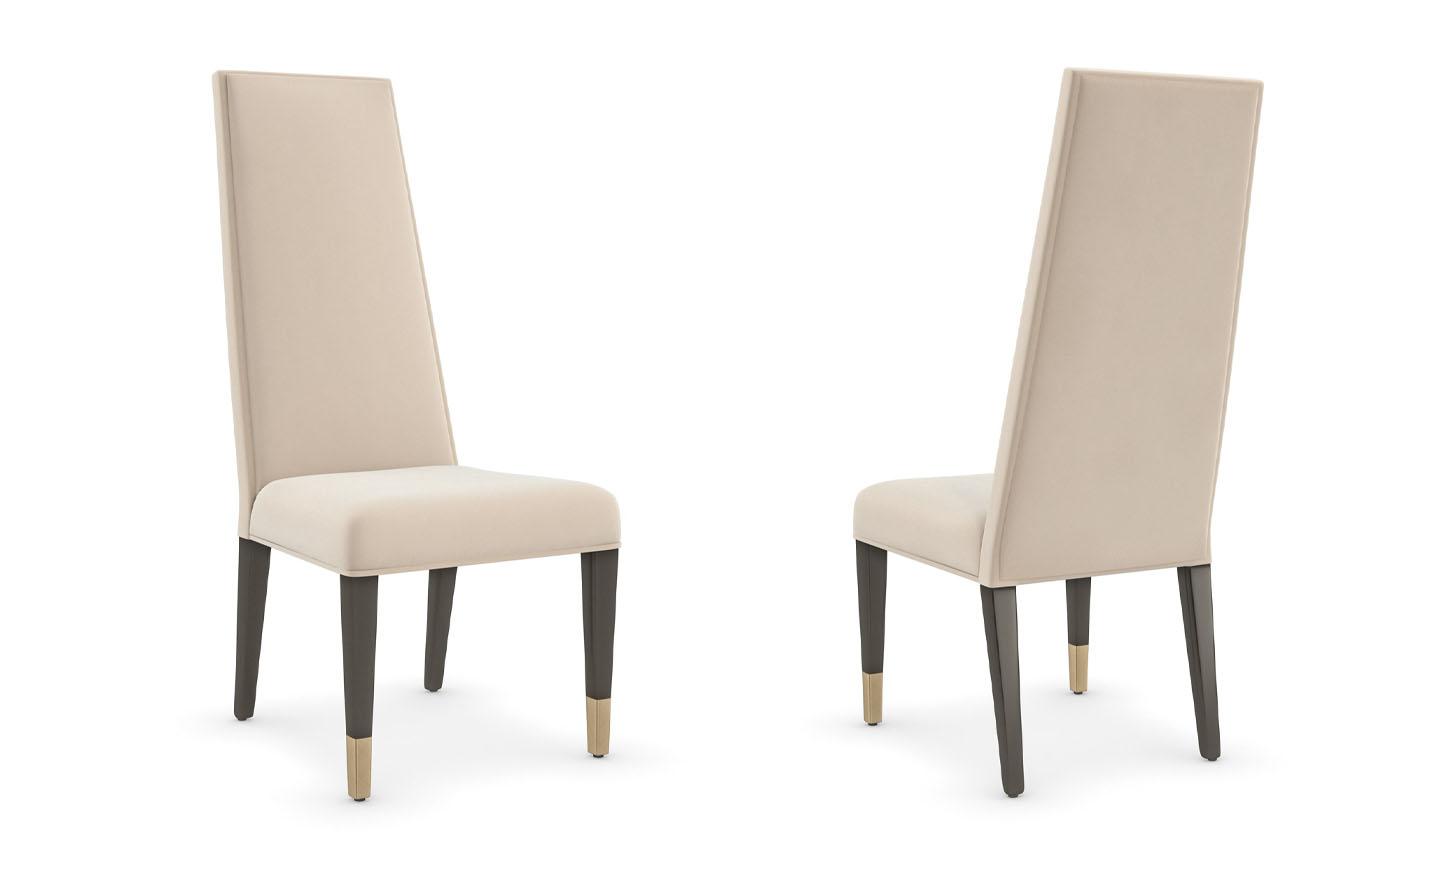 Contemporary Dining Chair Set THE MASTERS DINING SIDE CHAIR SIG-021-281-Set-2 in Cream, Gold, Chocolate Fabric